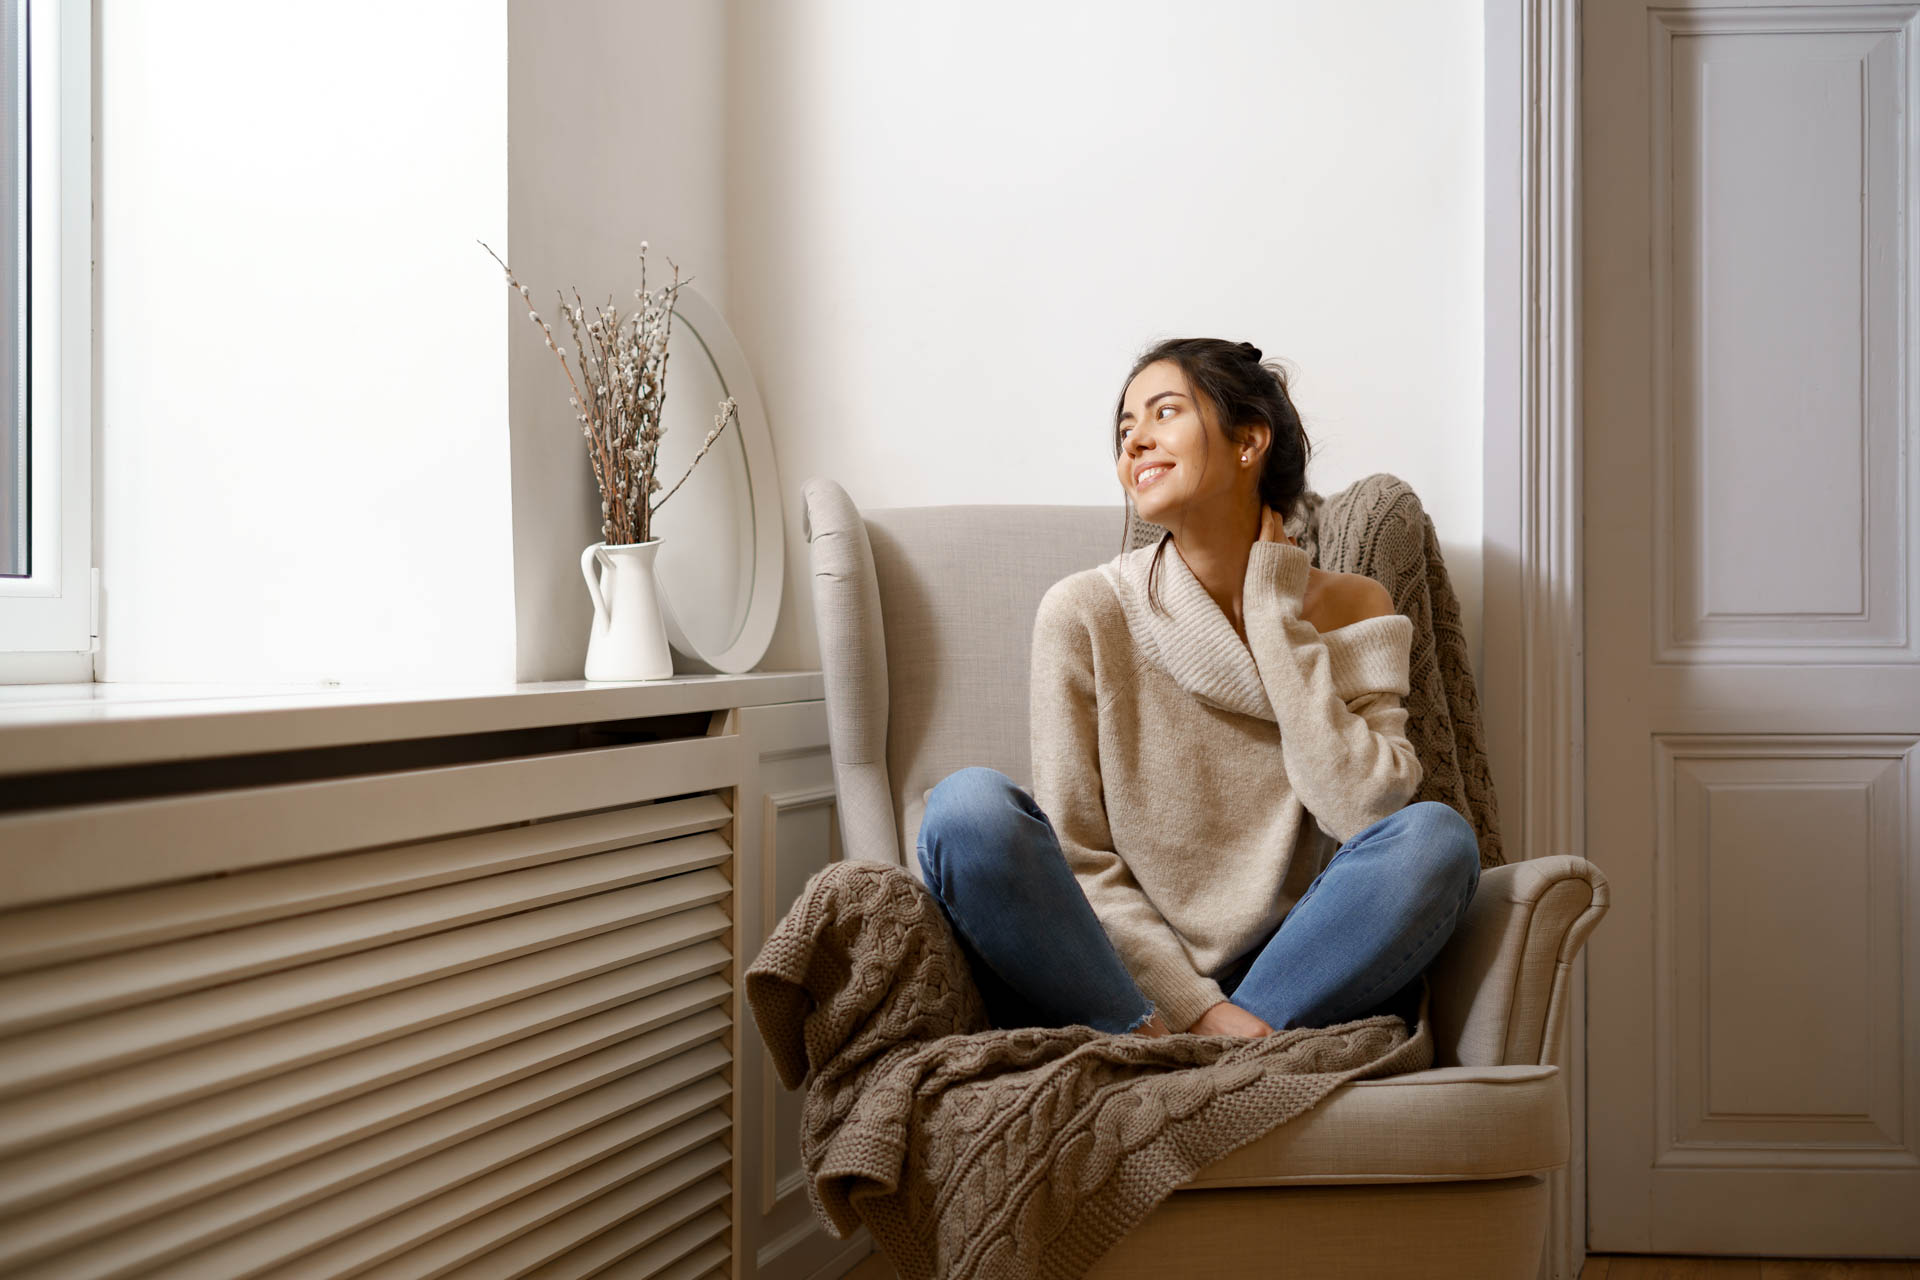 A woman in a cozy sweater sits relaxed in an armchair by a window, smiling and looking away, with a vase of branches and a book on plumbing nearby.